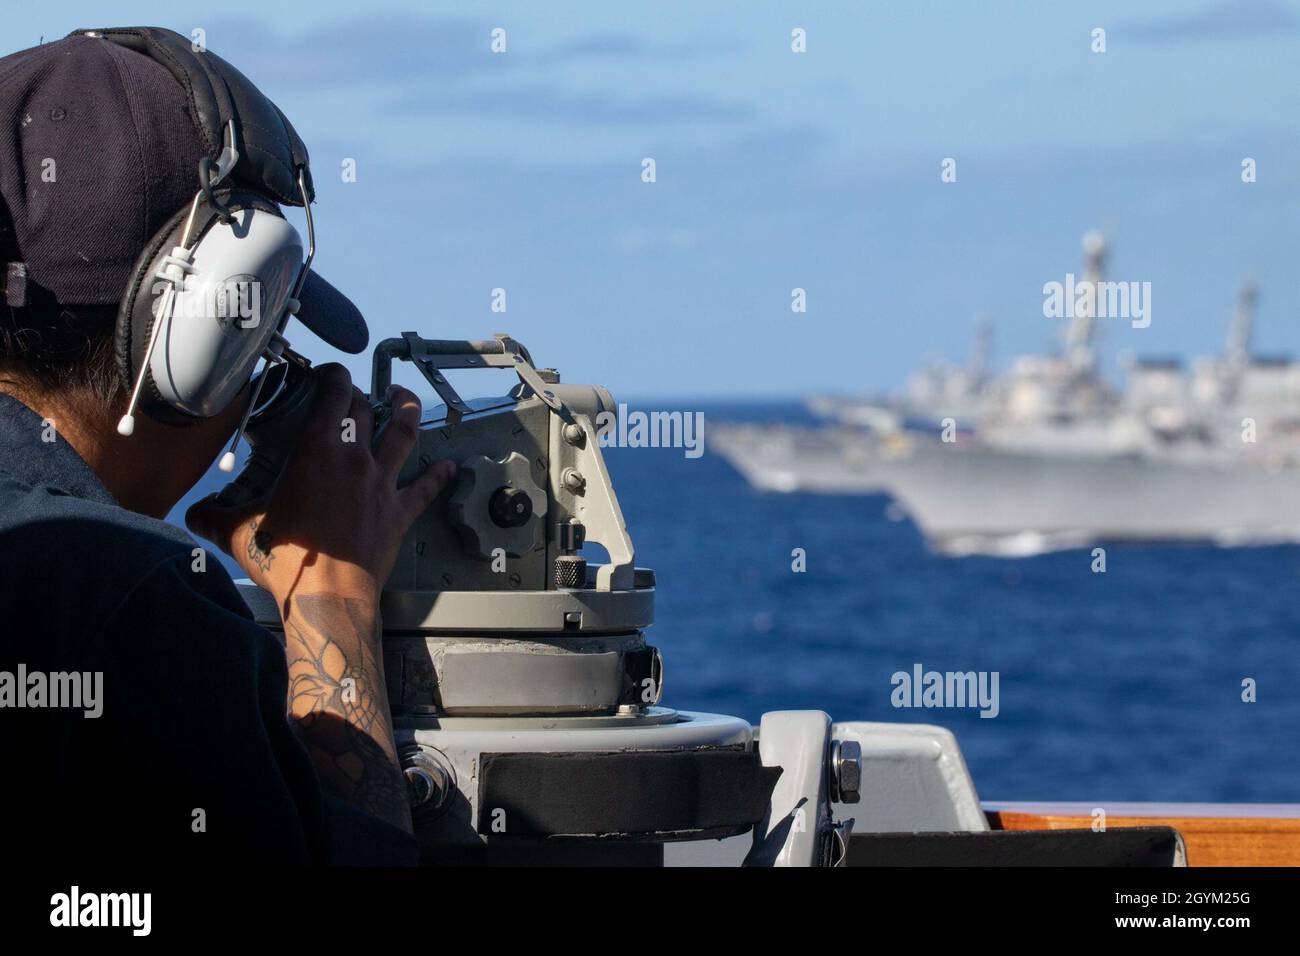 PACIFIC OCEAN (Jan. 25, 2020) Boatswain’s Mate 3rd Class Mariah Blondet, from Columbus, Ohio, uses a telescopic alidade aboard the Arleigh Burke-class guided-missile destroyer USS Pinckney (DDG 91) Jan. 25, 2020. Pinckney, part of the Theodore Roosevelt Carrier Strike Group, is on a scheduled deployment to the Indo-Pacific. (U.S. Navy photo by Mass Communication Specialist 3rd Class Erick A. Parsons) Stock Photo